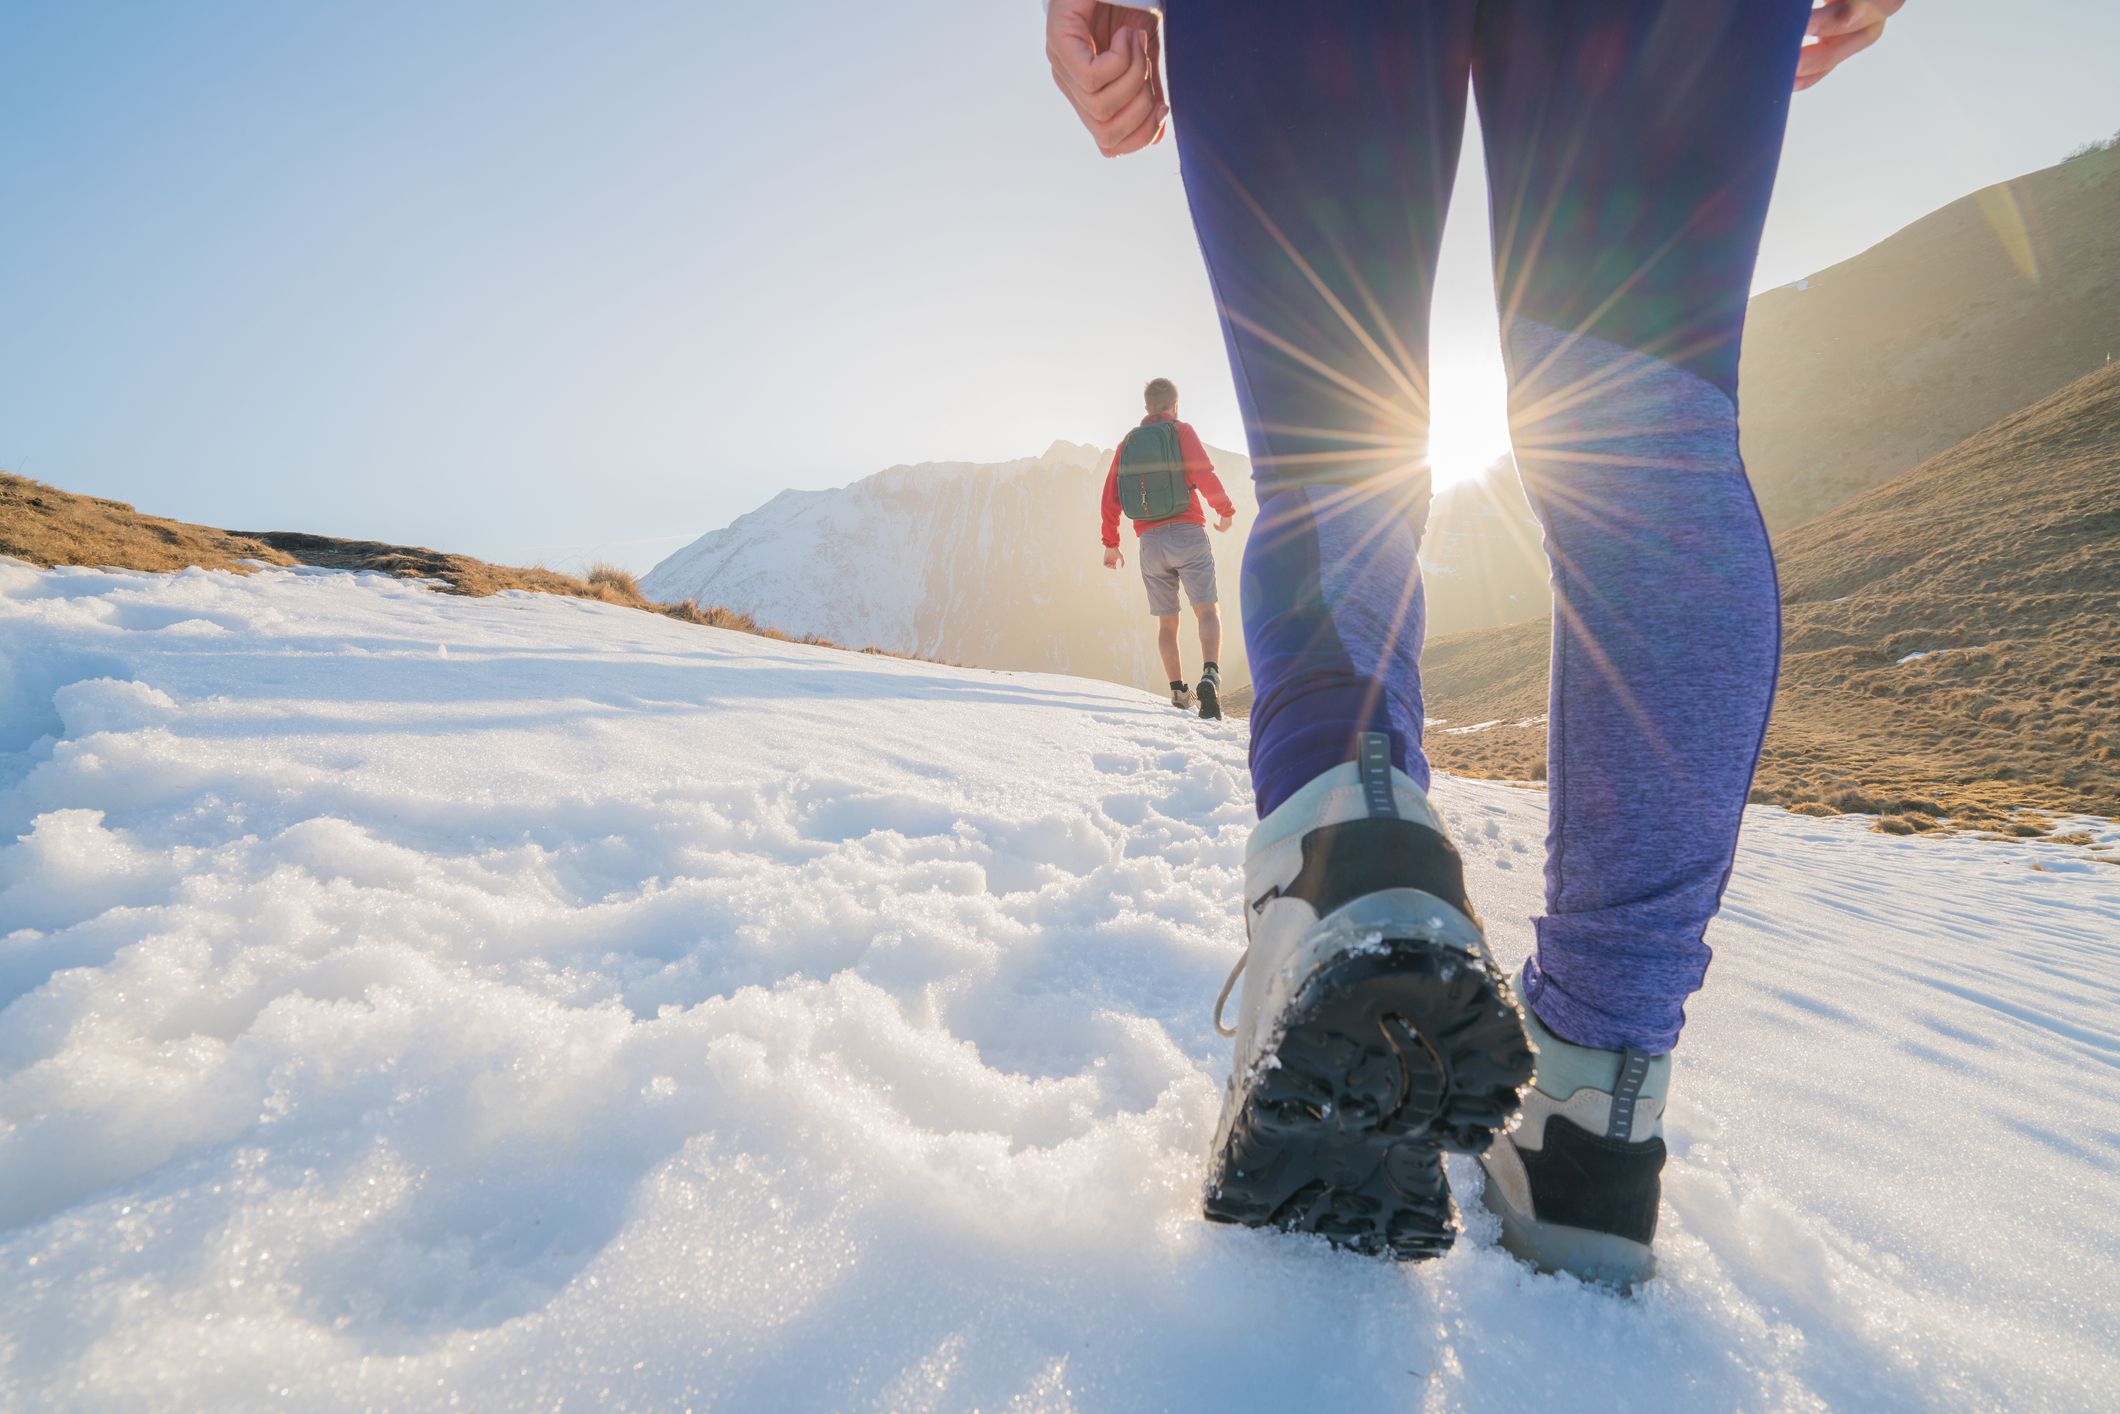 Running In Snow And Ice Safely: 5 Winter Running Tips To Stay Upright